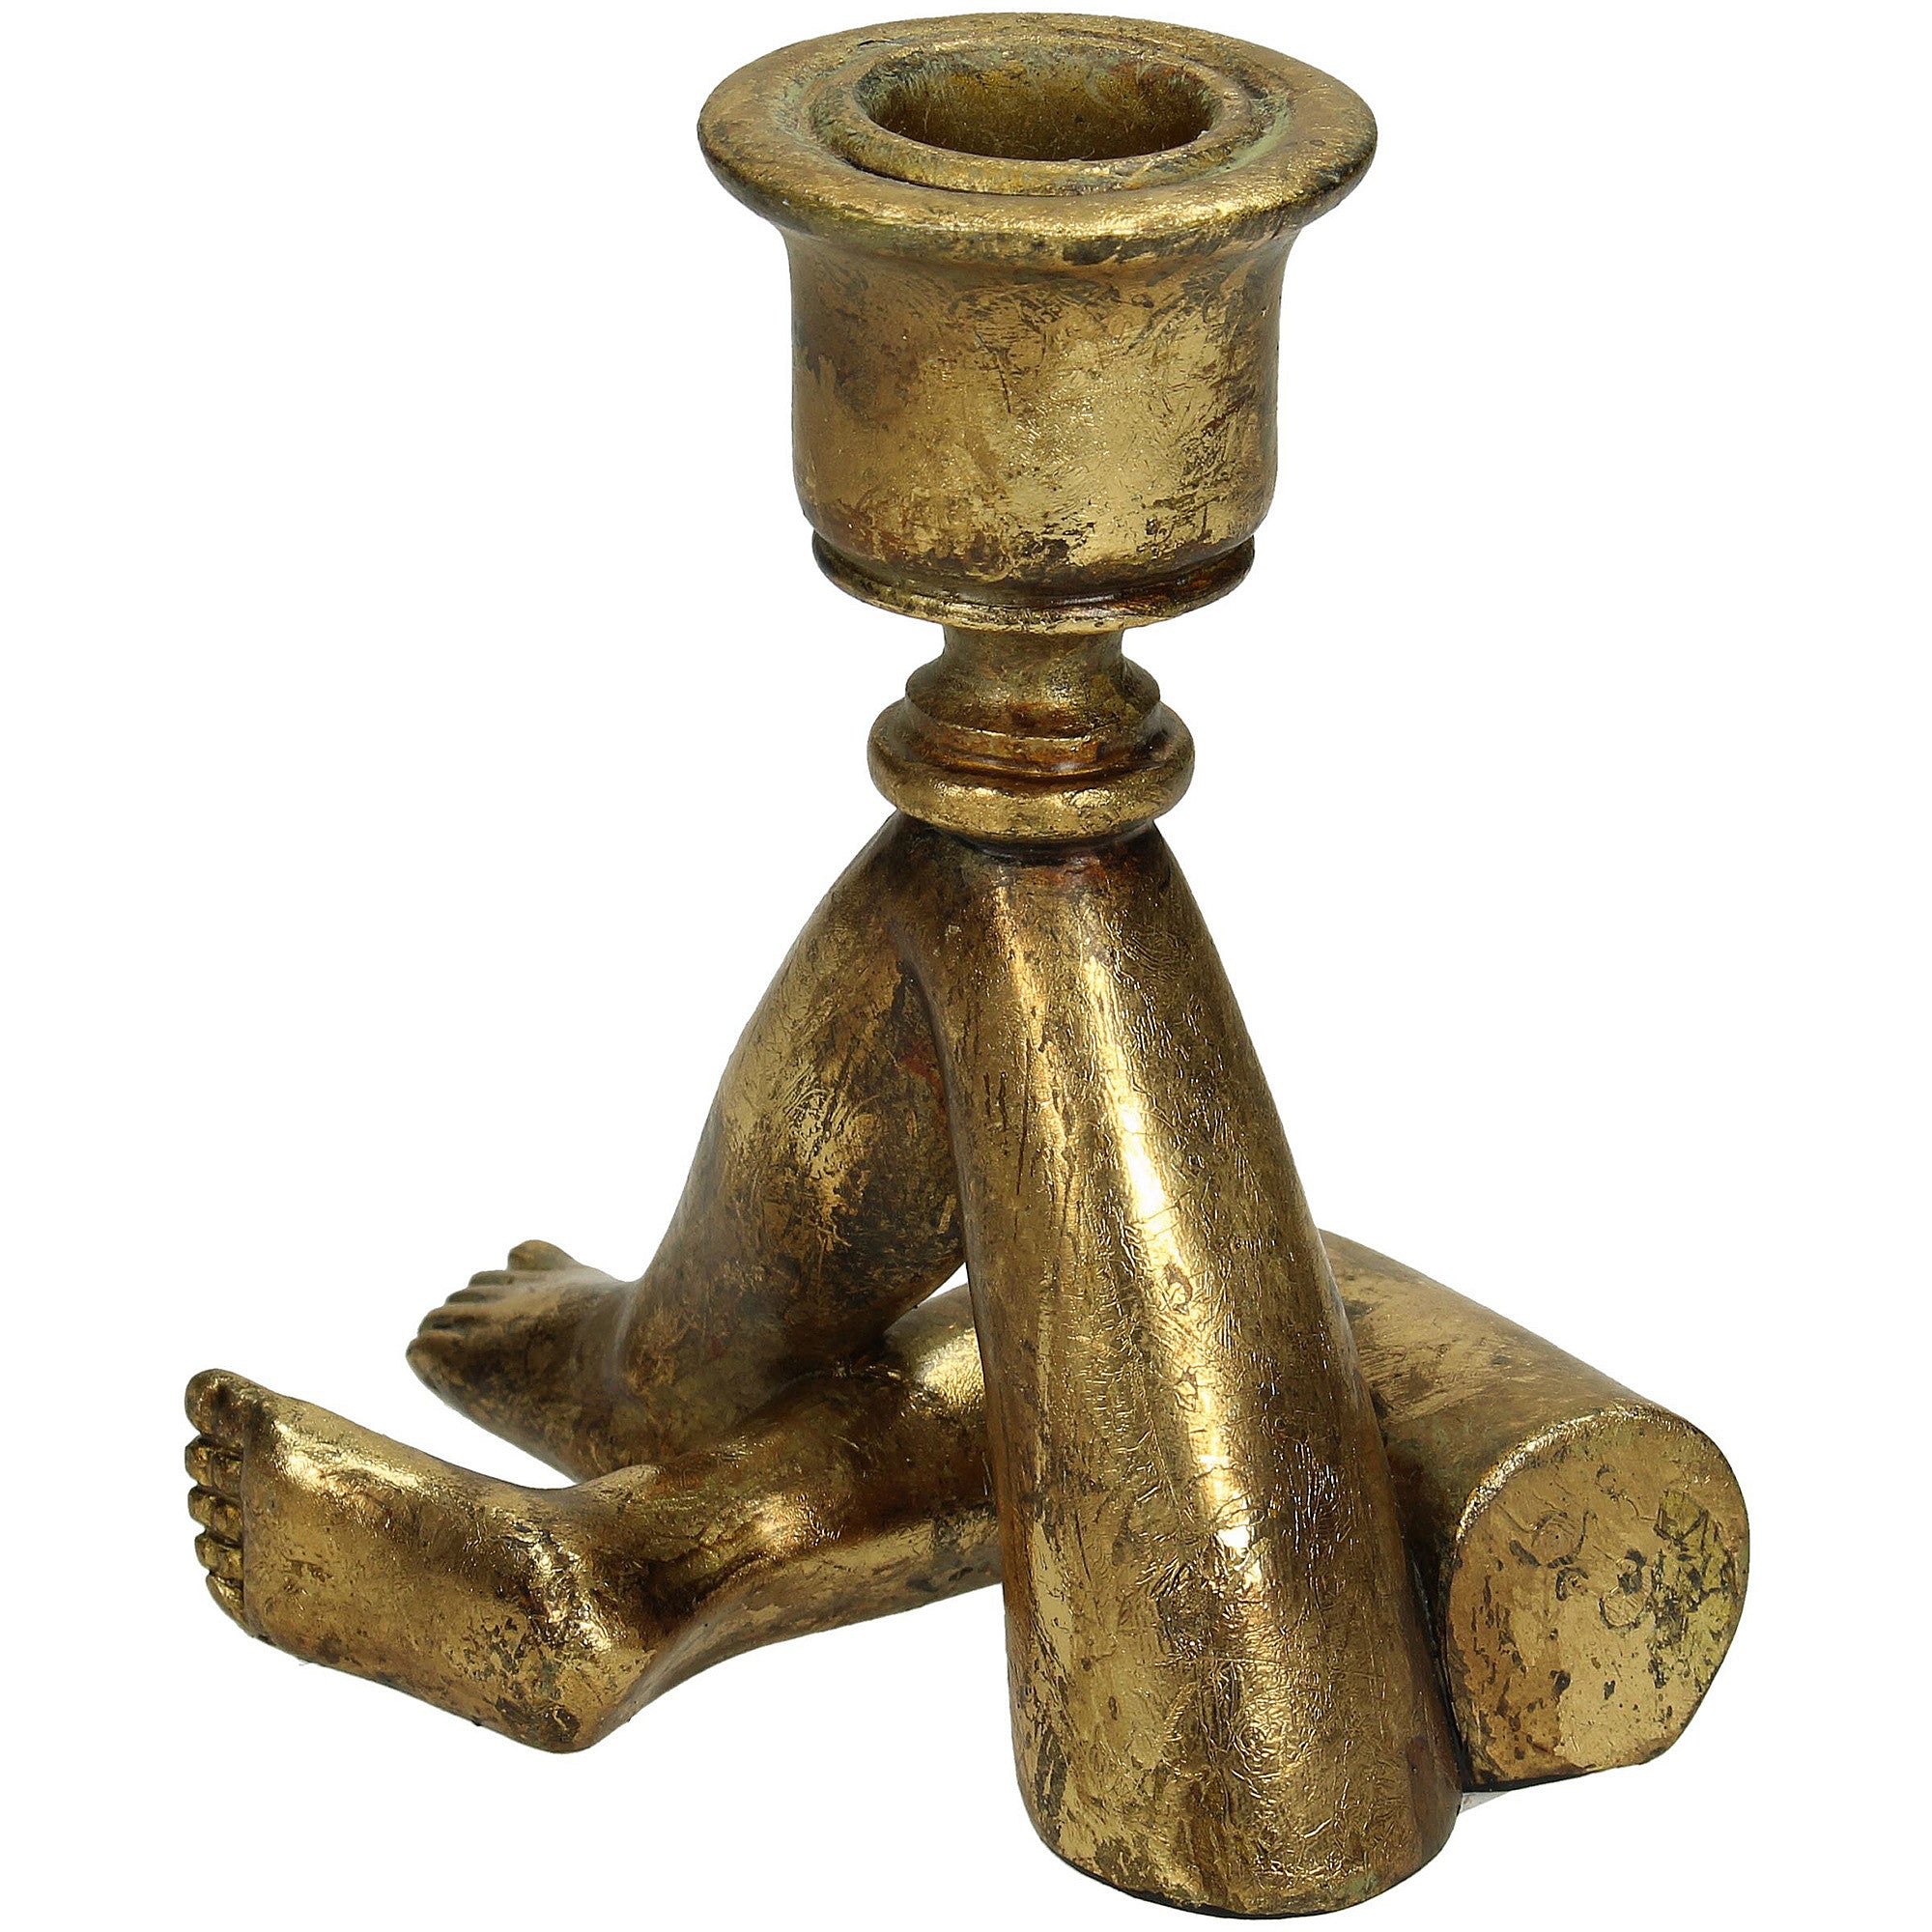 Antiqued Gold Legs Candle Holder